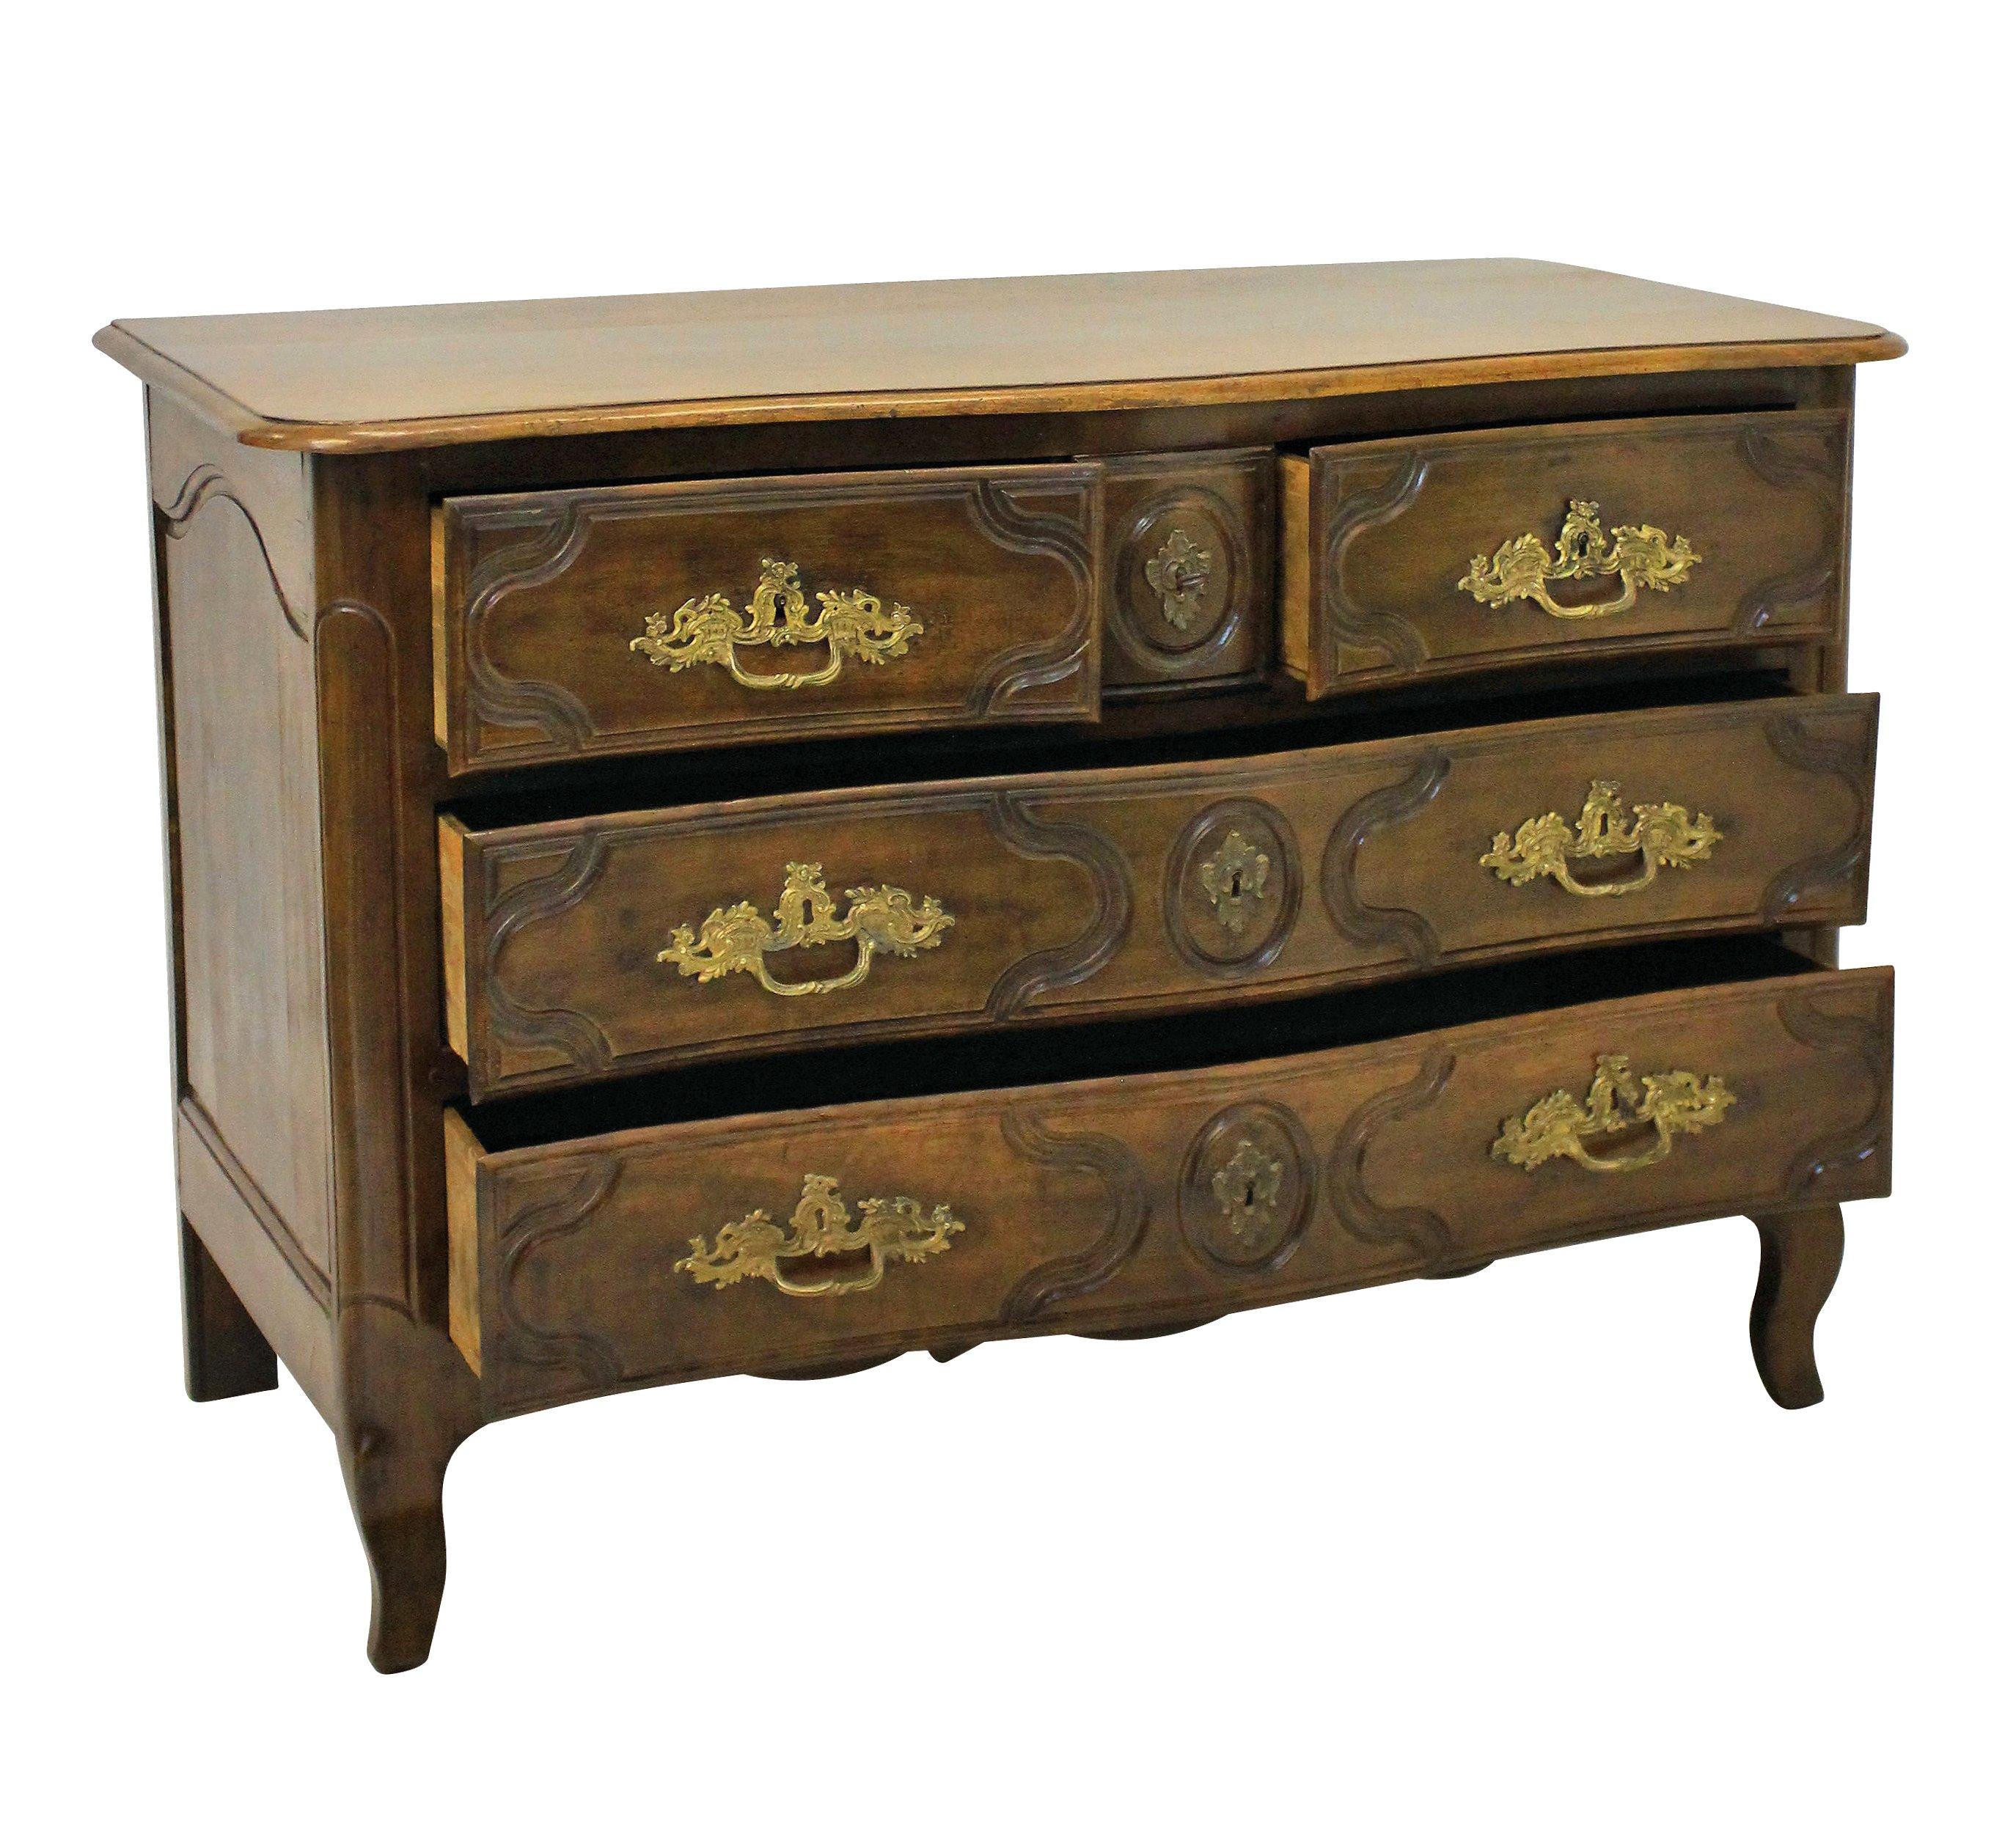 An 18th century French Louis XV walnut commode, with serpentine front and five drawers. The original handles in gilt bronze, overall with a great patina.
      
 